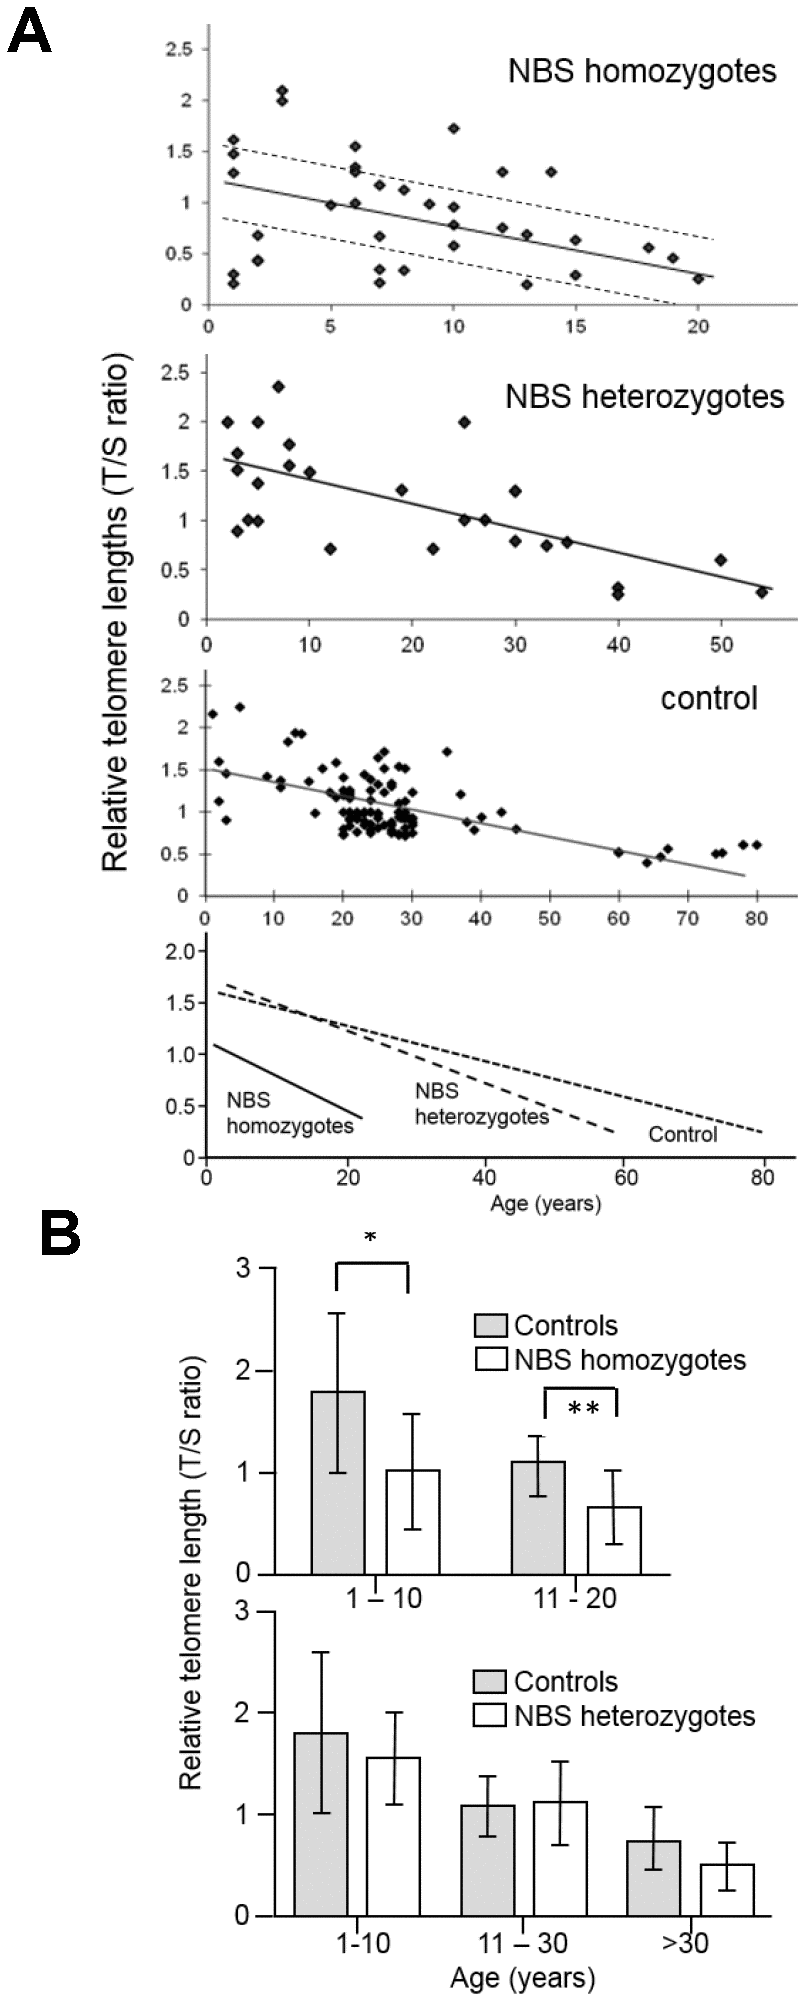 (A) Relative telomere length (TL) as a function of age in NBS homozygotes, heterozygotes, and control individuals. Relative TL (T/S ratio) was analyzed from blood samples of 38 NBS homozygotes, 27 NBS heterozygotes, and 108 control individuals by quantitative polymerase chain reaction (qPCR). The dashed lines separate the NBS homozygotes in those with long, medium, and short TL. Below: regression curves standardized for age. Original after thesis Raneem Habib [28]. (B) Comparison of TL, as analyzed by qPCR, of NBS homozygotes, heterozygotes, and controls. The comparison was made for age-matched groups (mean values and standard deviation). * indicates p